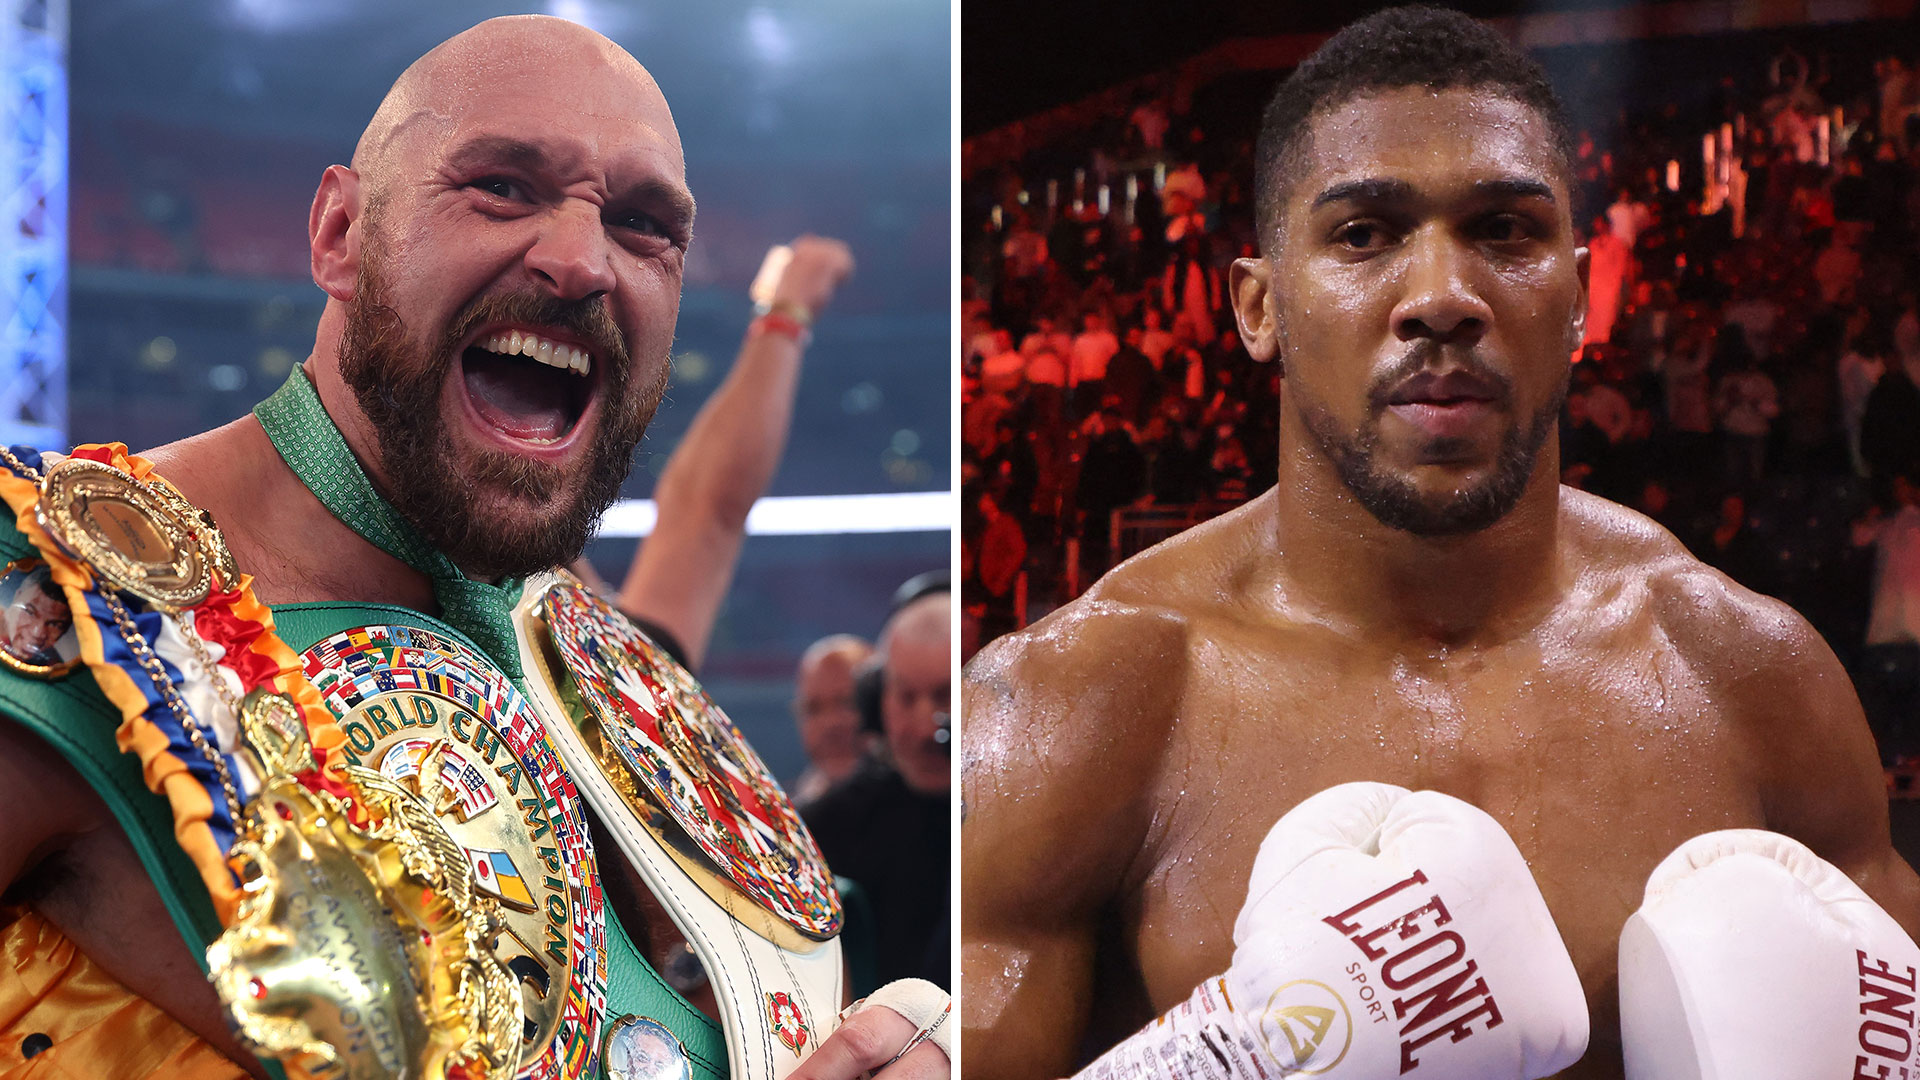 When is Tyson Fury fighting Anthony Joshua? [Video]